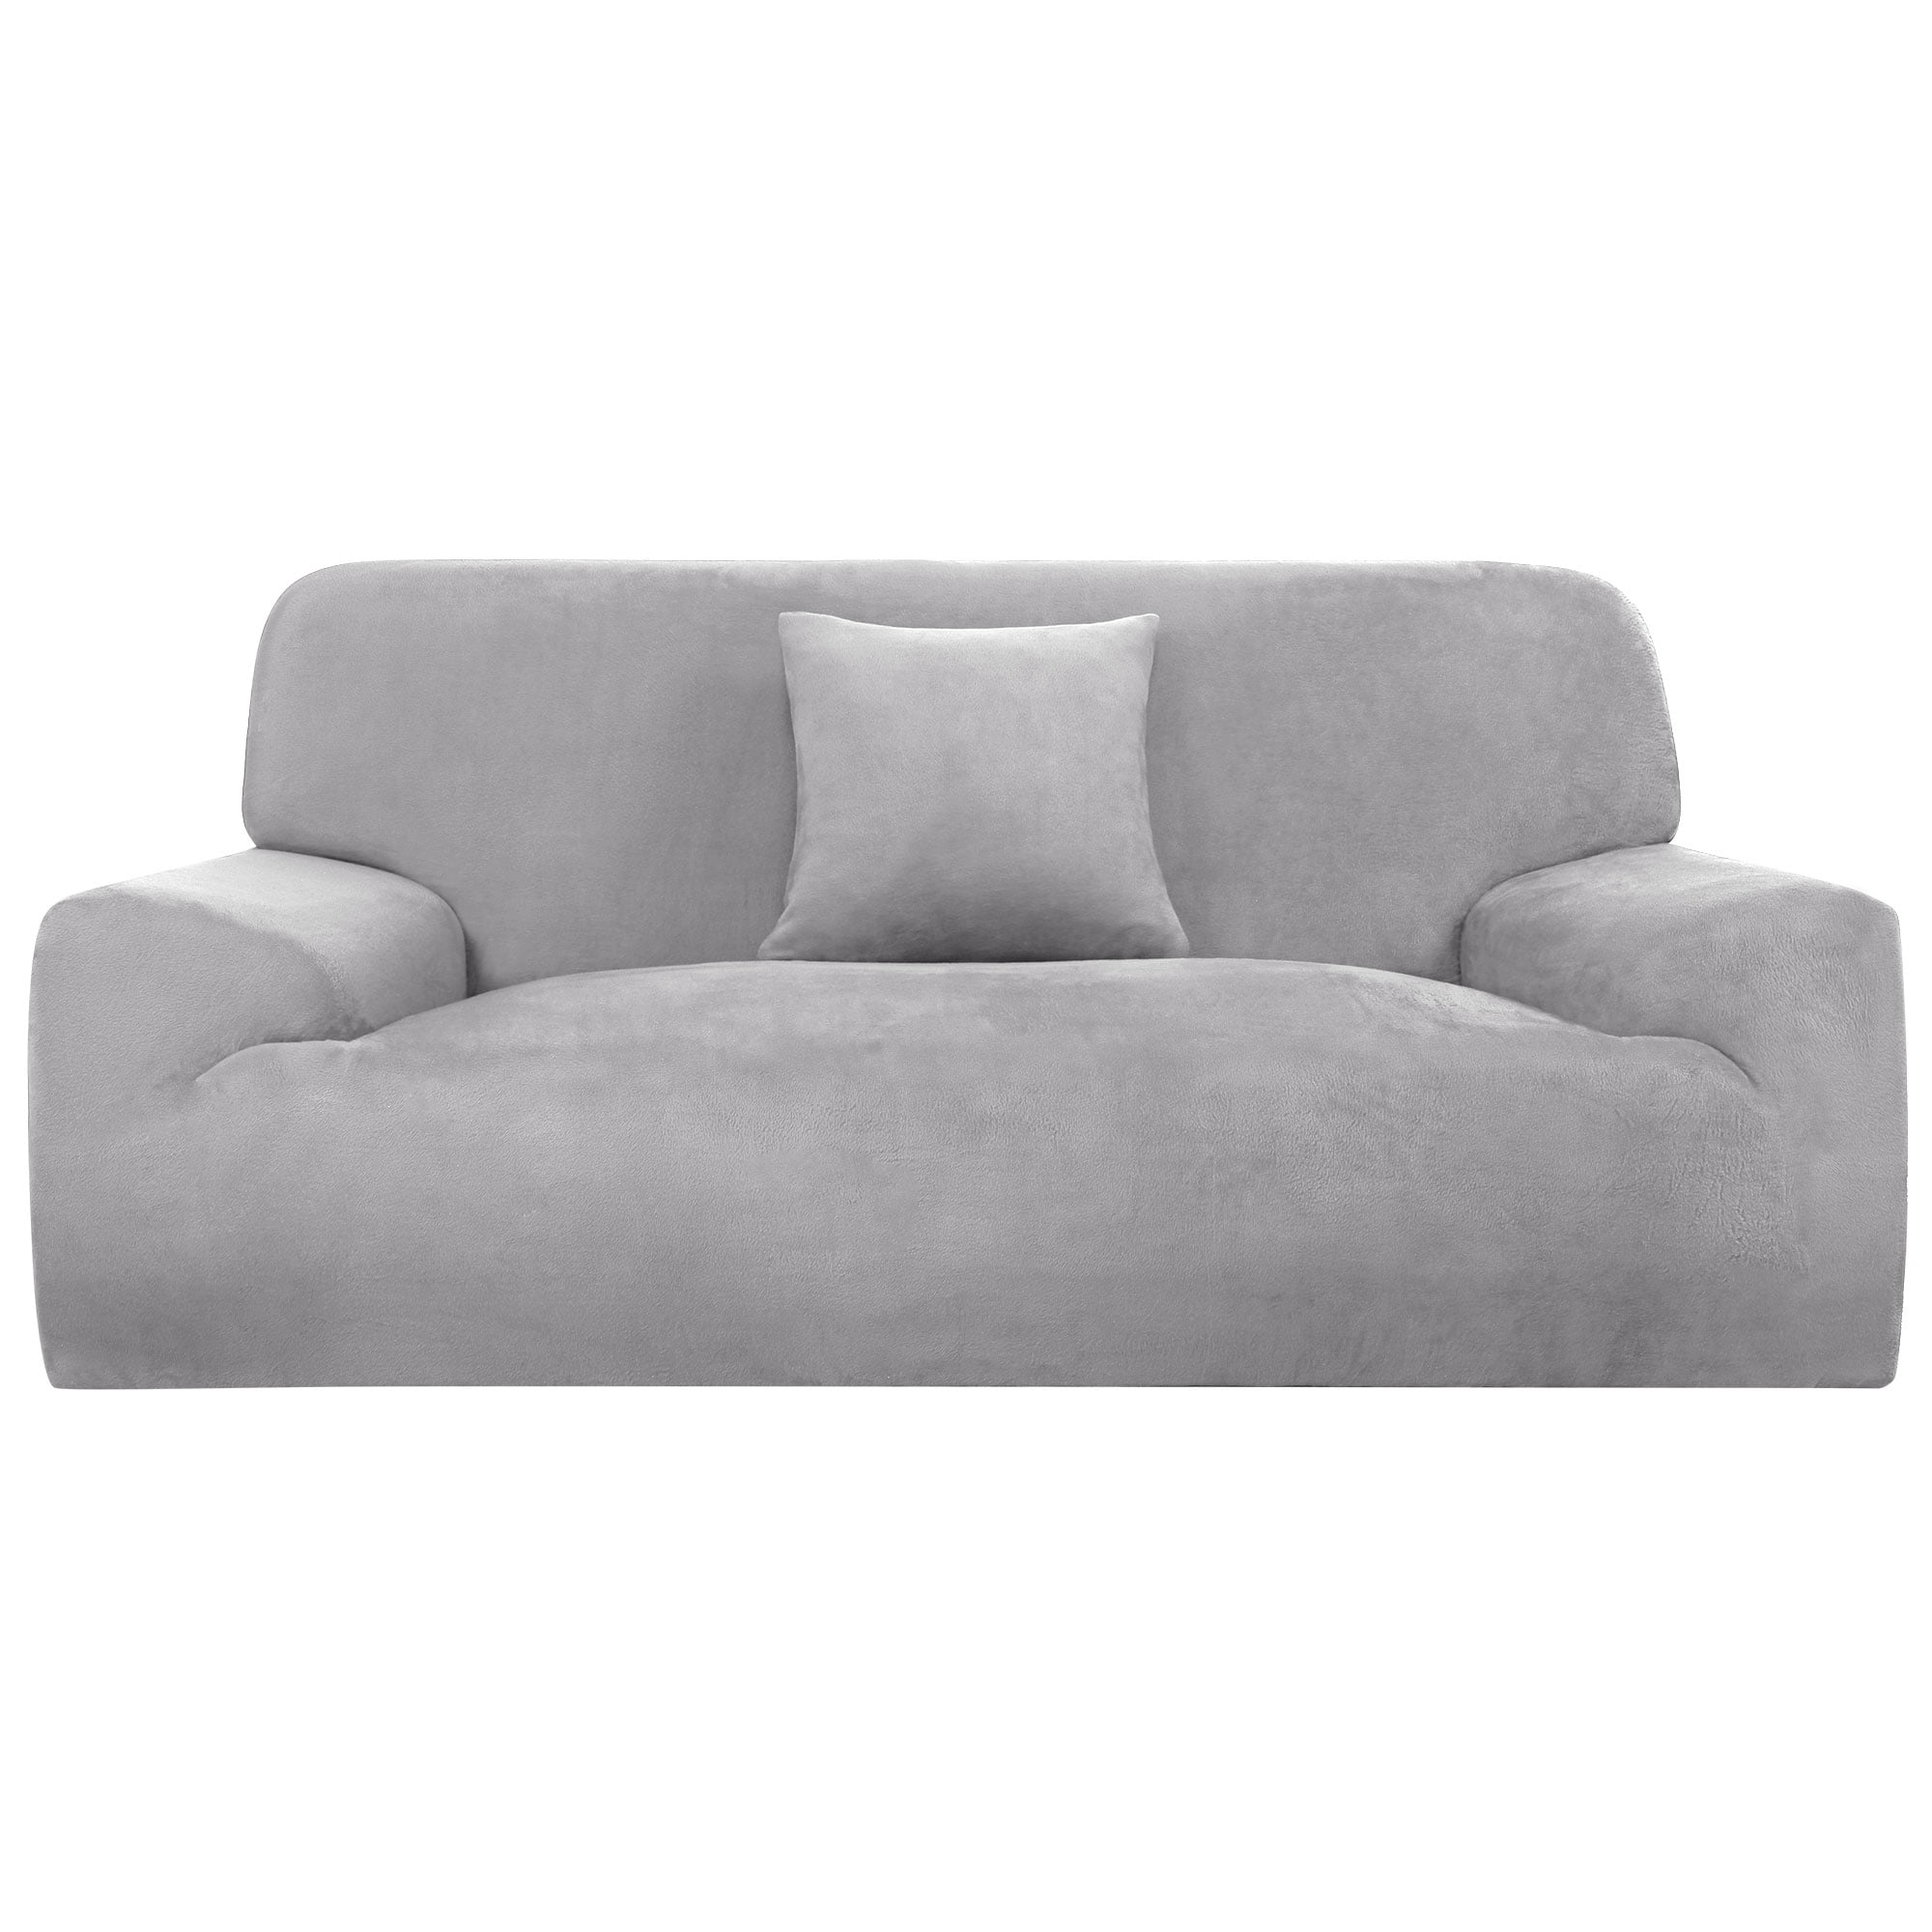 Details about   Elastic Sofa Covers Velvet Stretch Slipcover Settee Couch Protect 1/2/3/4 Seater 